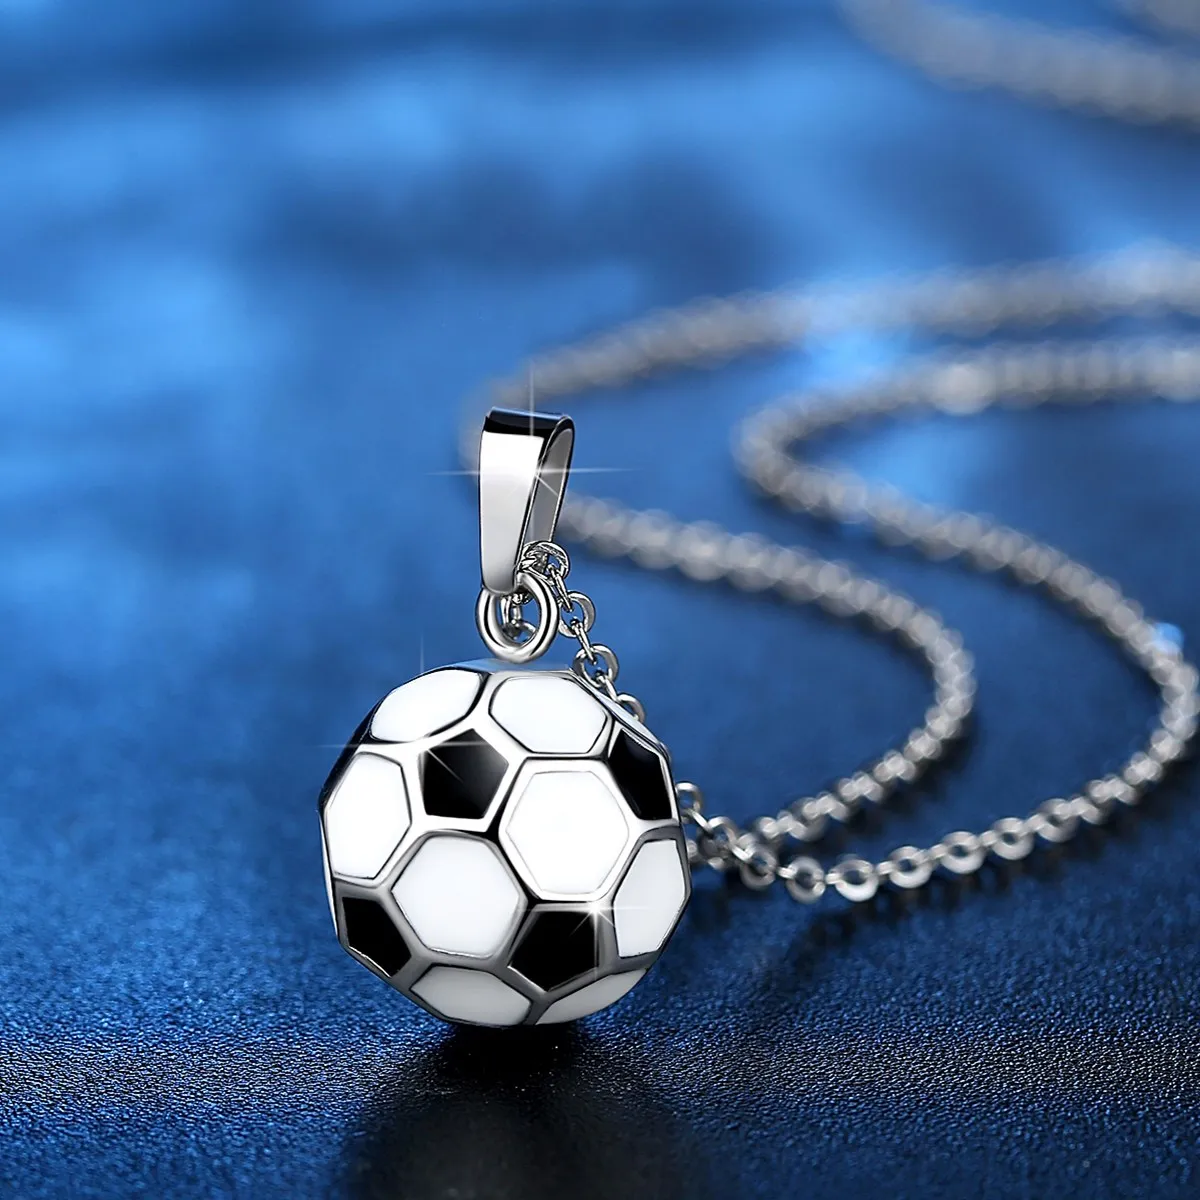 Soccer Ball Necklace, SOCCER Gift, Personalized Soccer Team Gift, Soccer  Player Jewelry for Girls, Kid Soccer, Soccer Coach, Soccer Mom - Etsy | Soccer  ball necklace, Personalized soccer team gifts, Soccer gifts